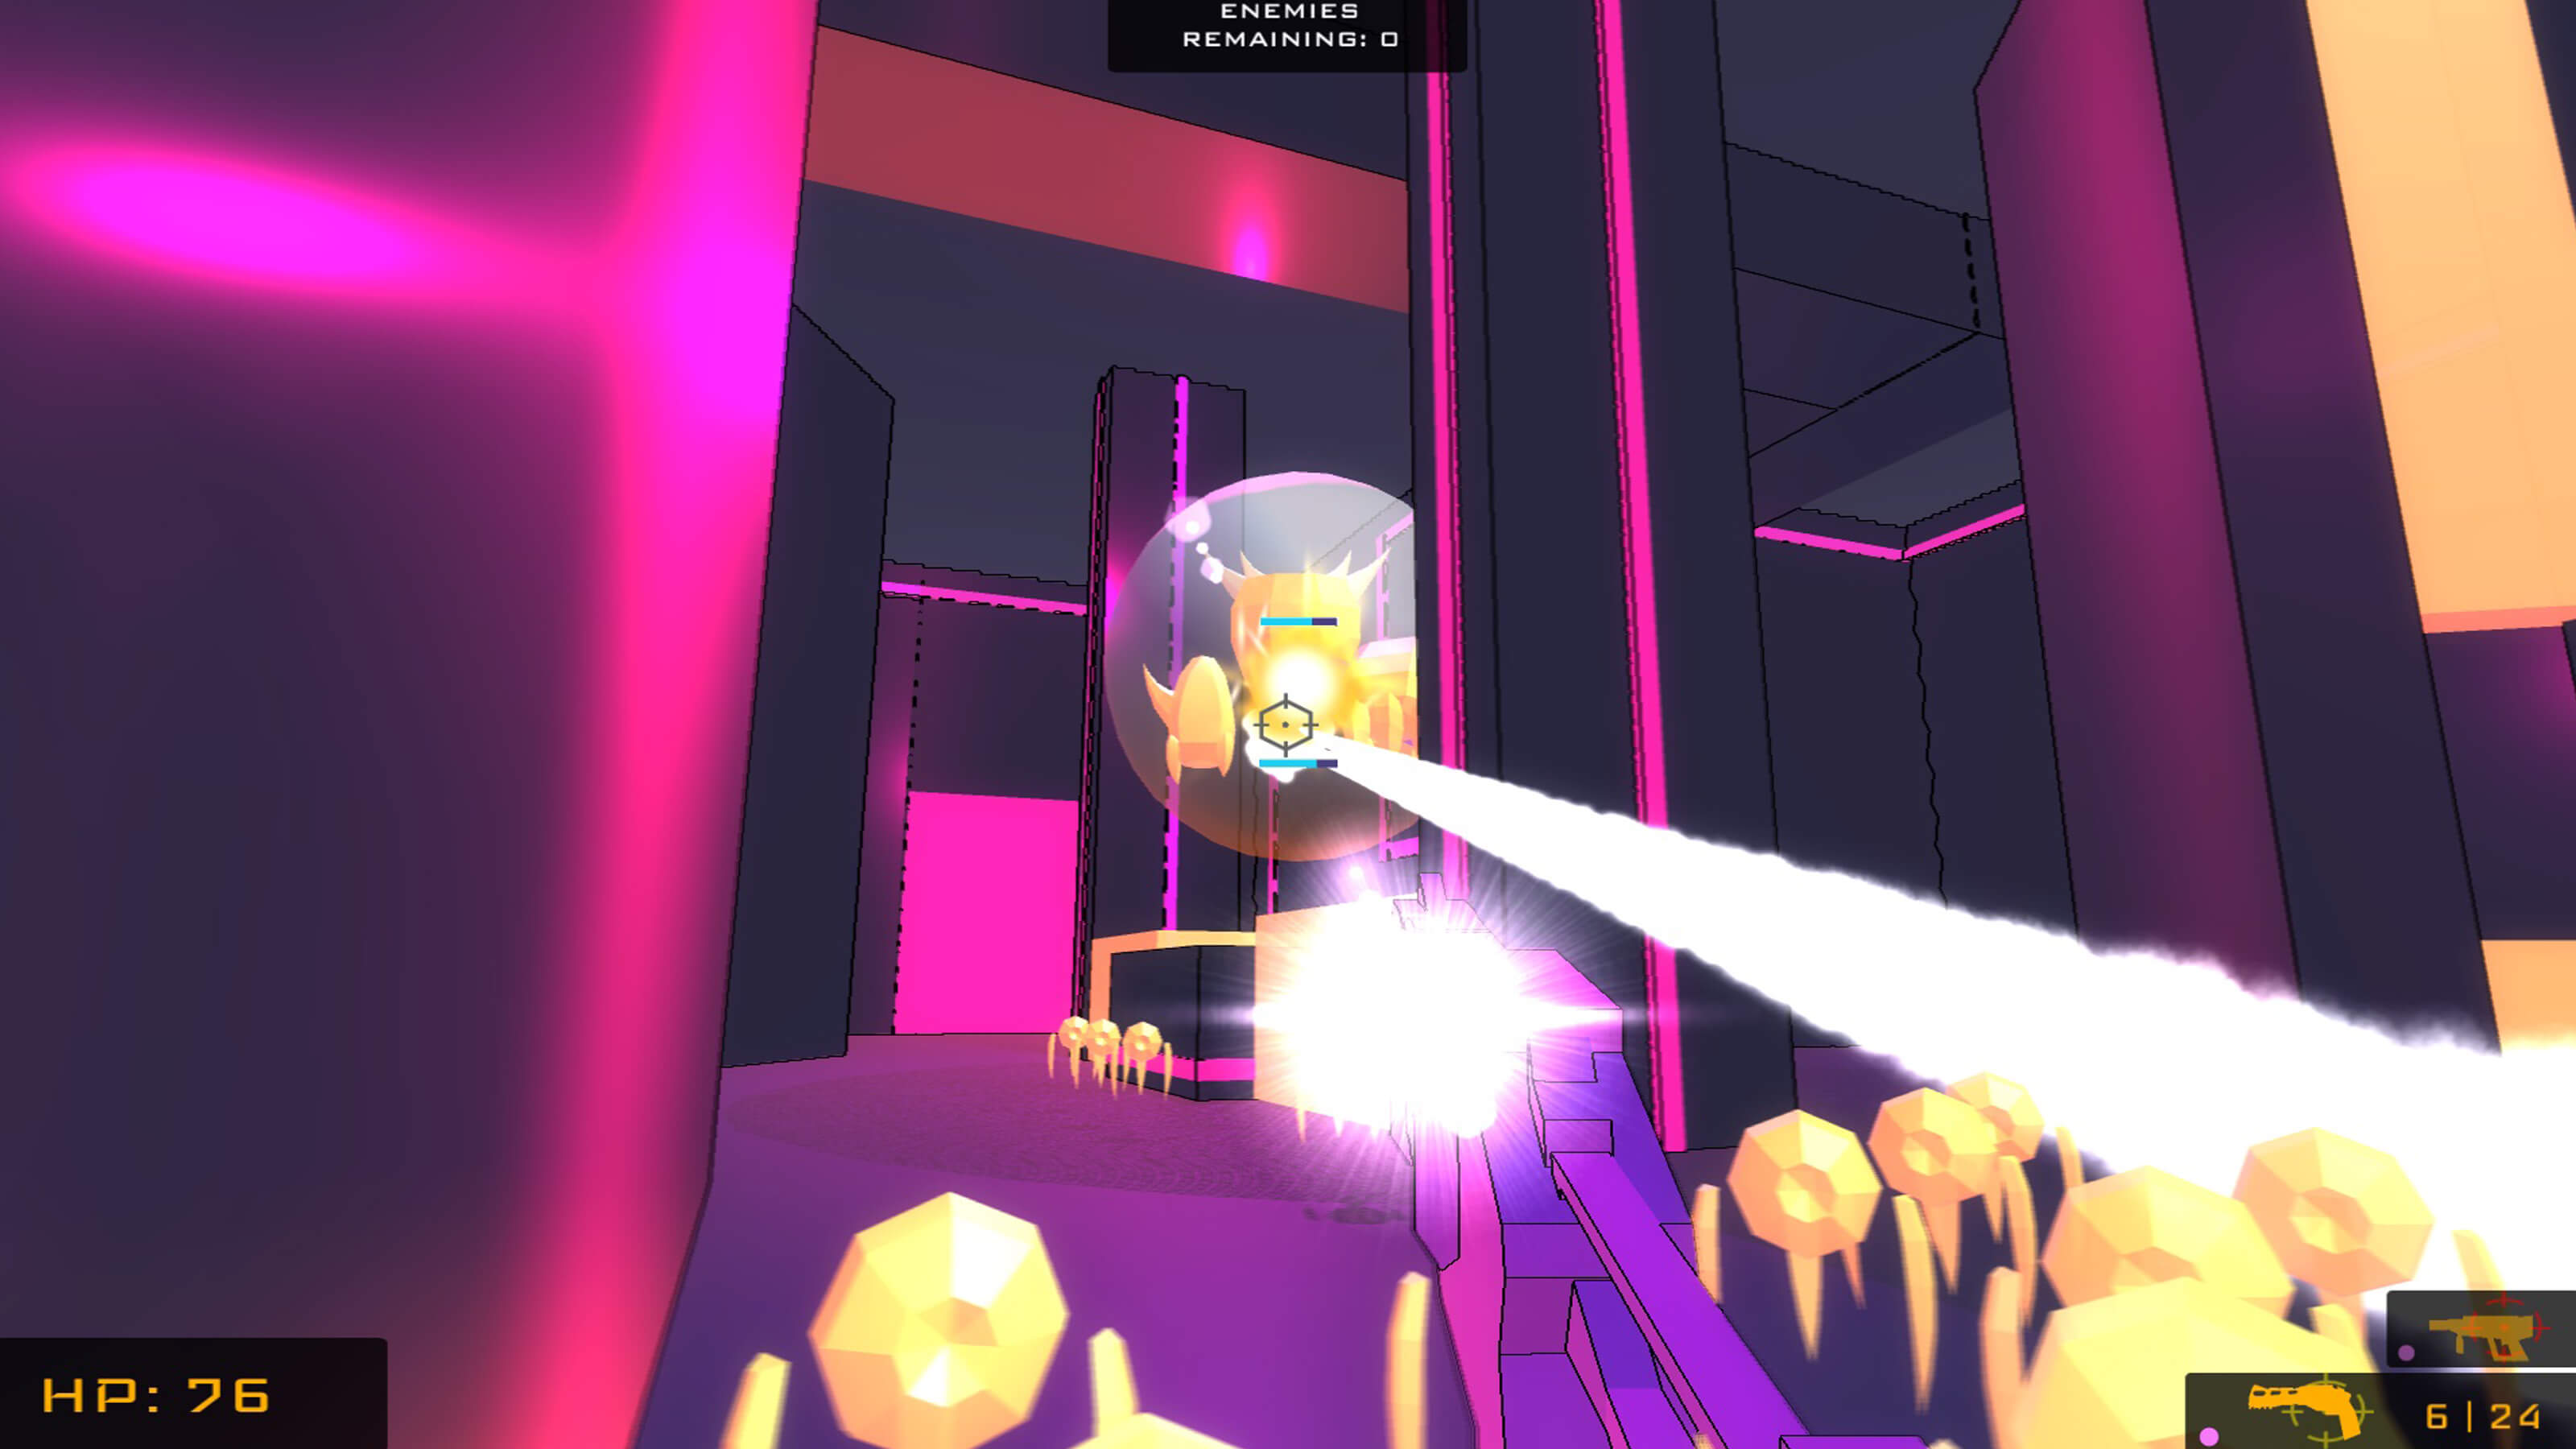 An anti-virus in a bubble shield shoots a glowing beam at the player, who fires back with a pink gun. 